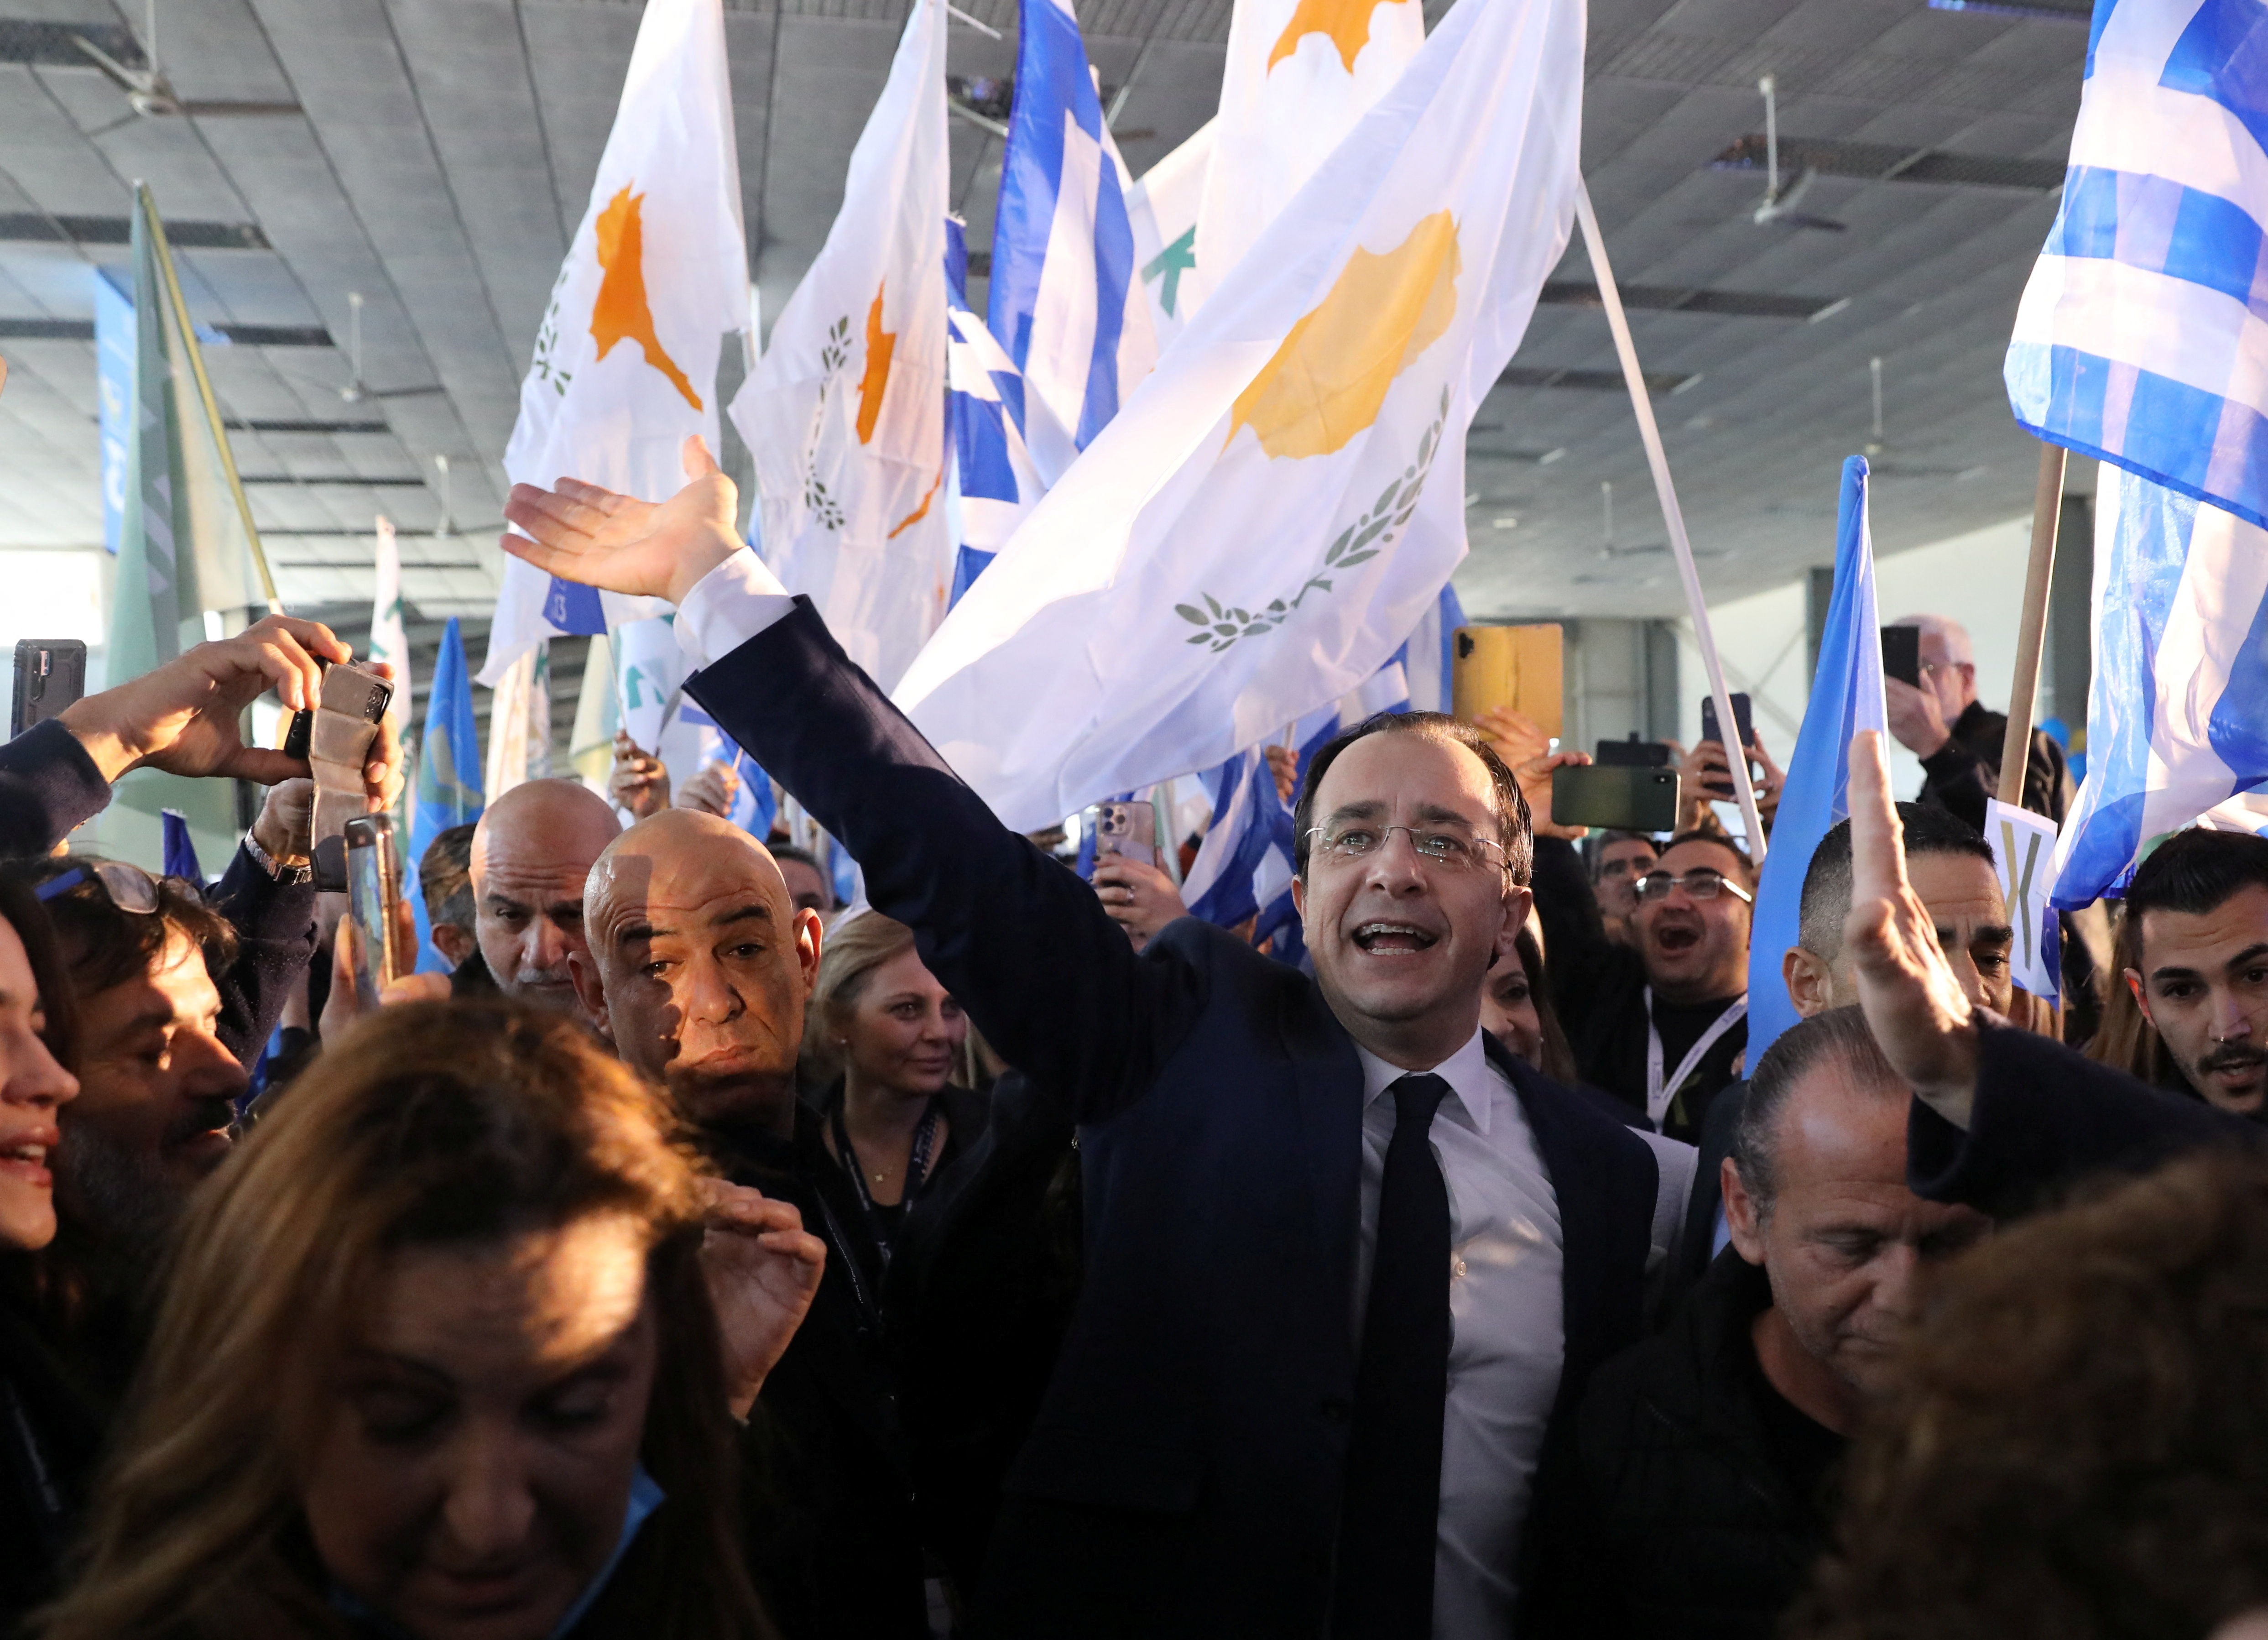 cover Christodoulides’ team remains tight lipped over €200,000 donation